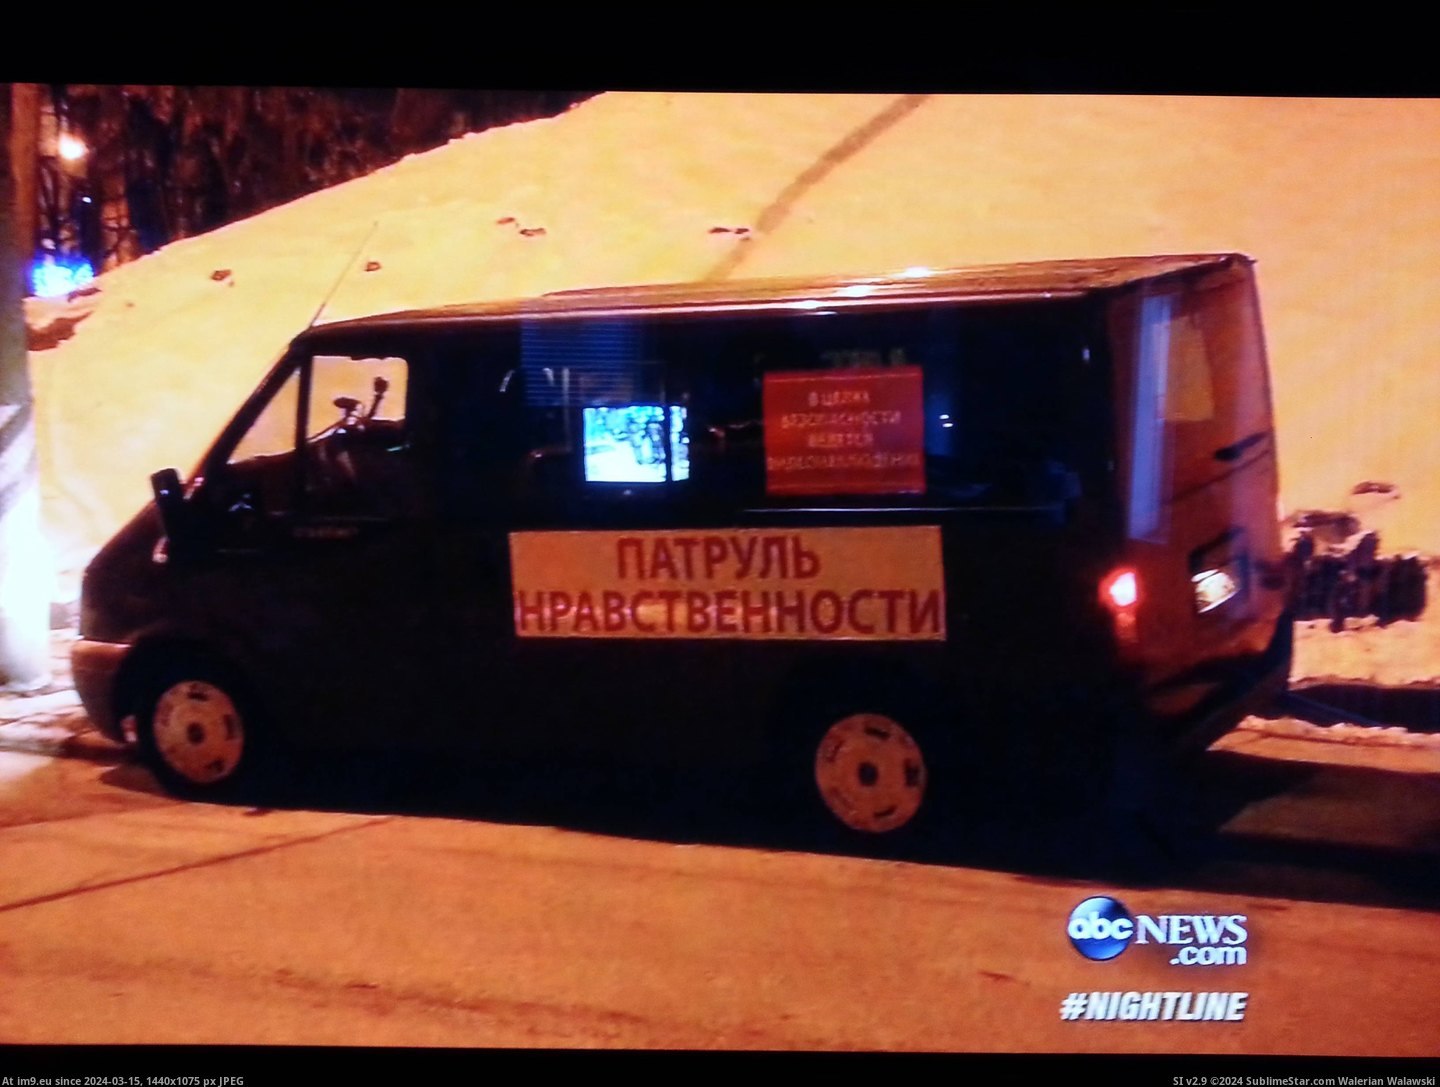 #Wtf #Gay #Night #People #Patrol #Monitors #Morality #Van #Club #Russia #Records [Wtf] Morality patrol van monitors and records all people that come and go in a gay night club in Russia. Pic. (Изображение из альбом My r/WTF favs))